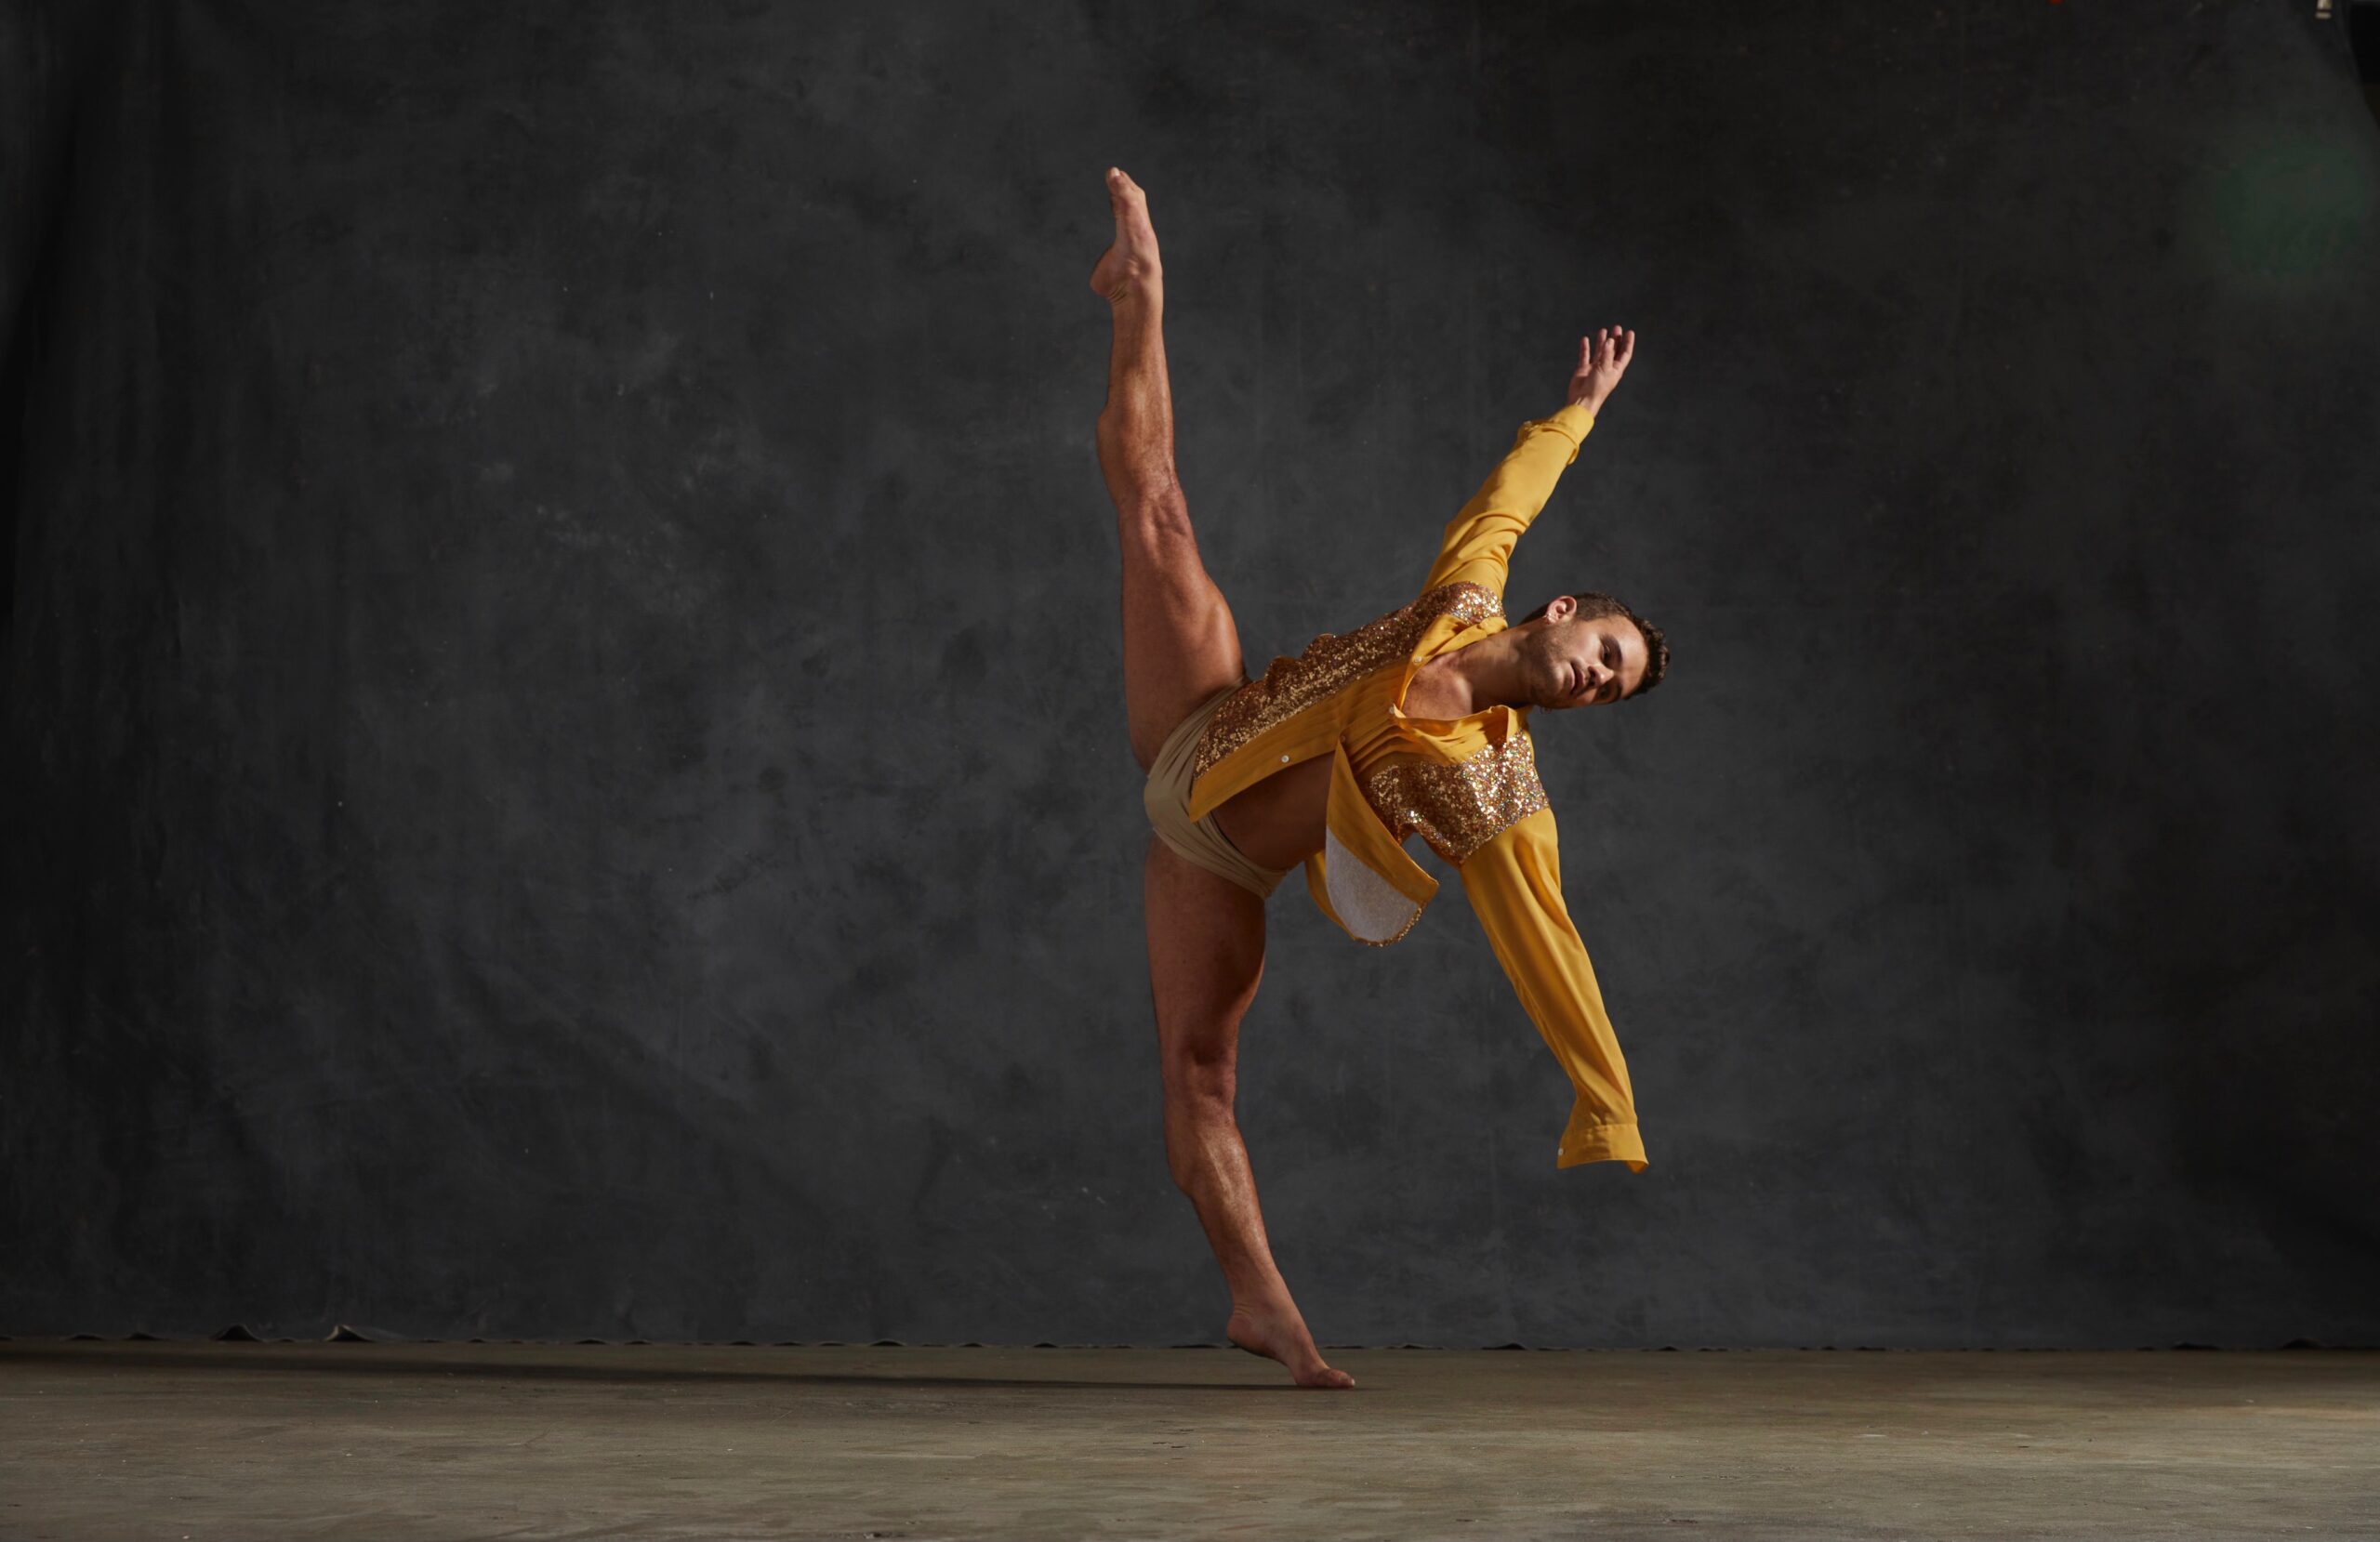 Dance Reed Tankersley in a dance pose with legs in a sideways split and arms outstretched. He wears an embellished yellow costume.